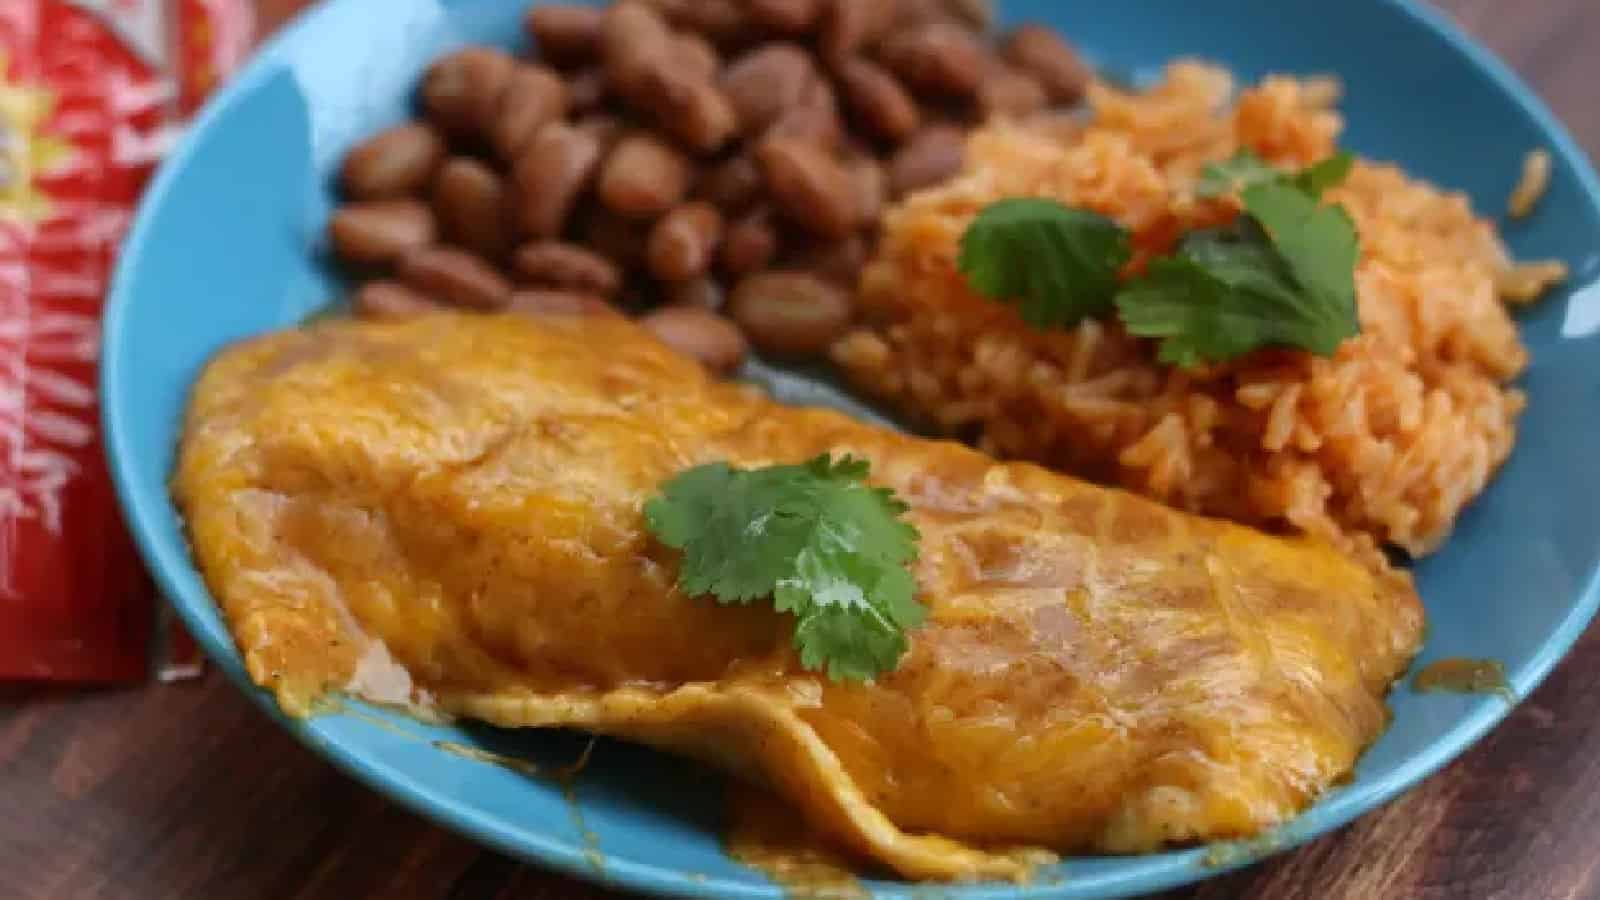 One cheese enchilada and rice and beans on a plate.